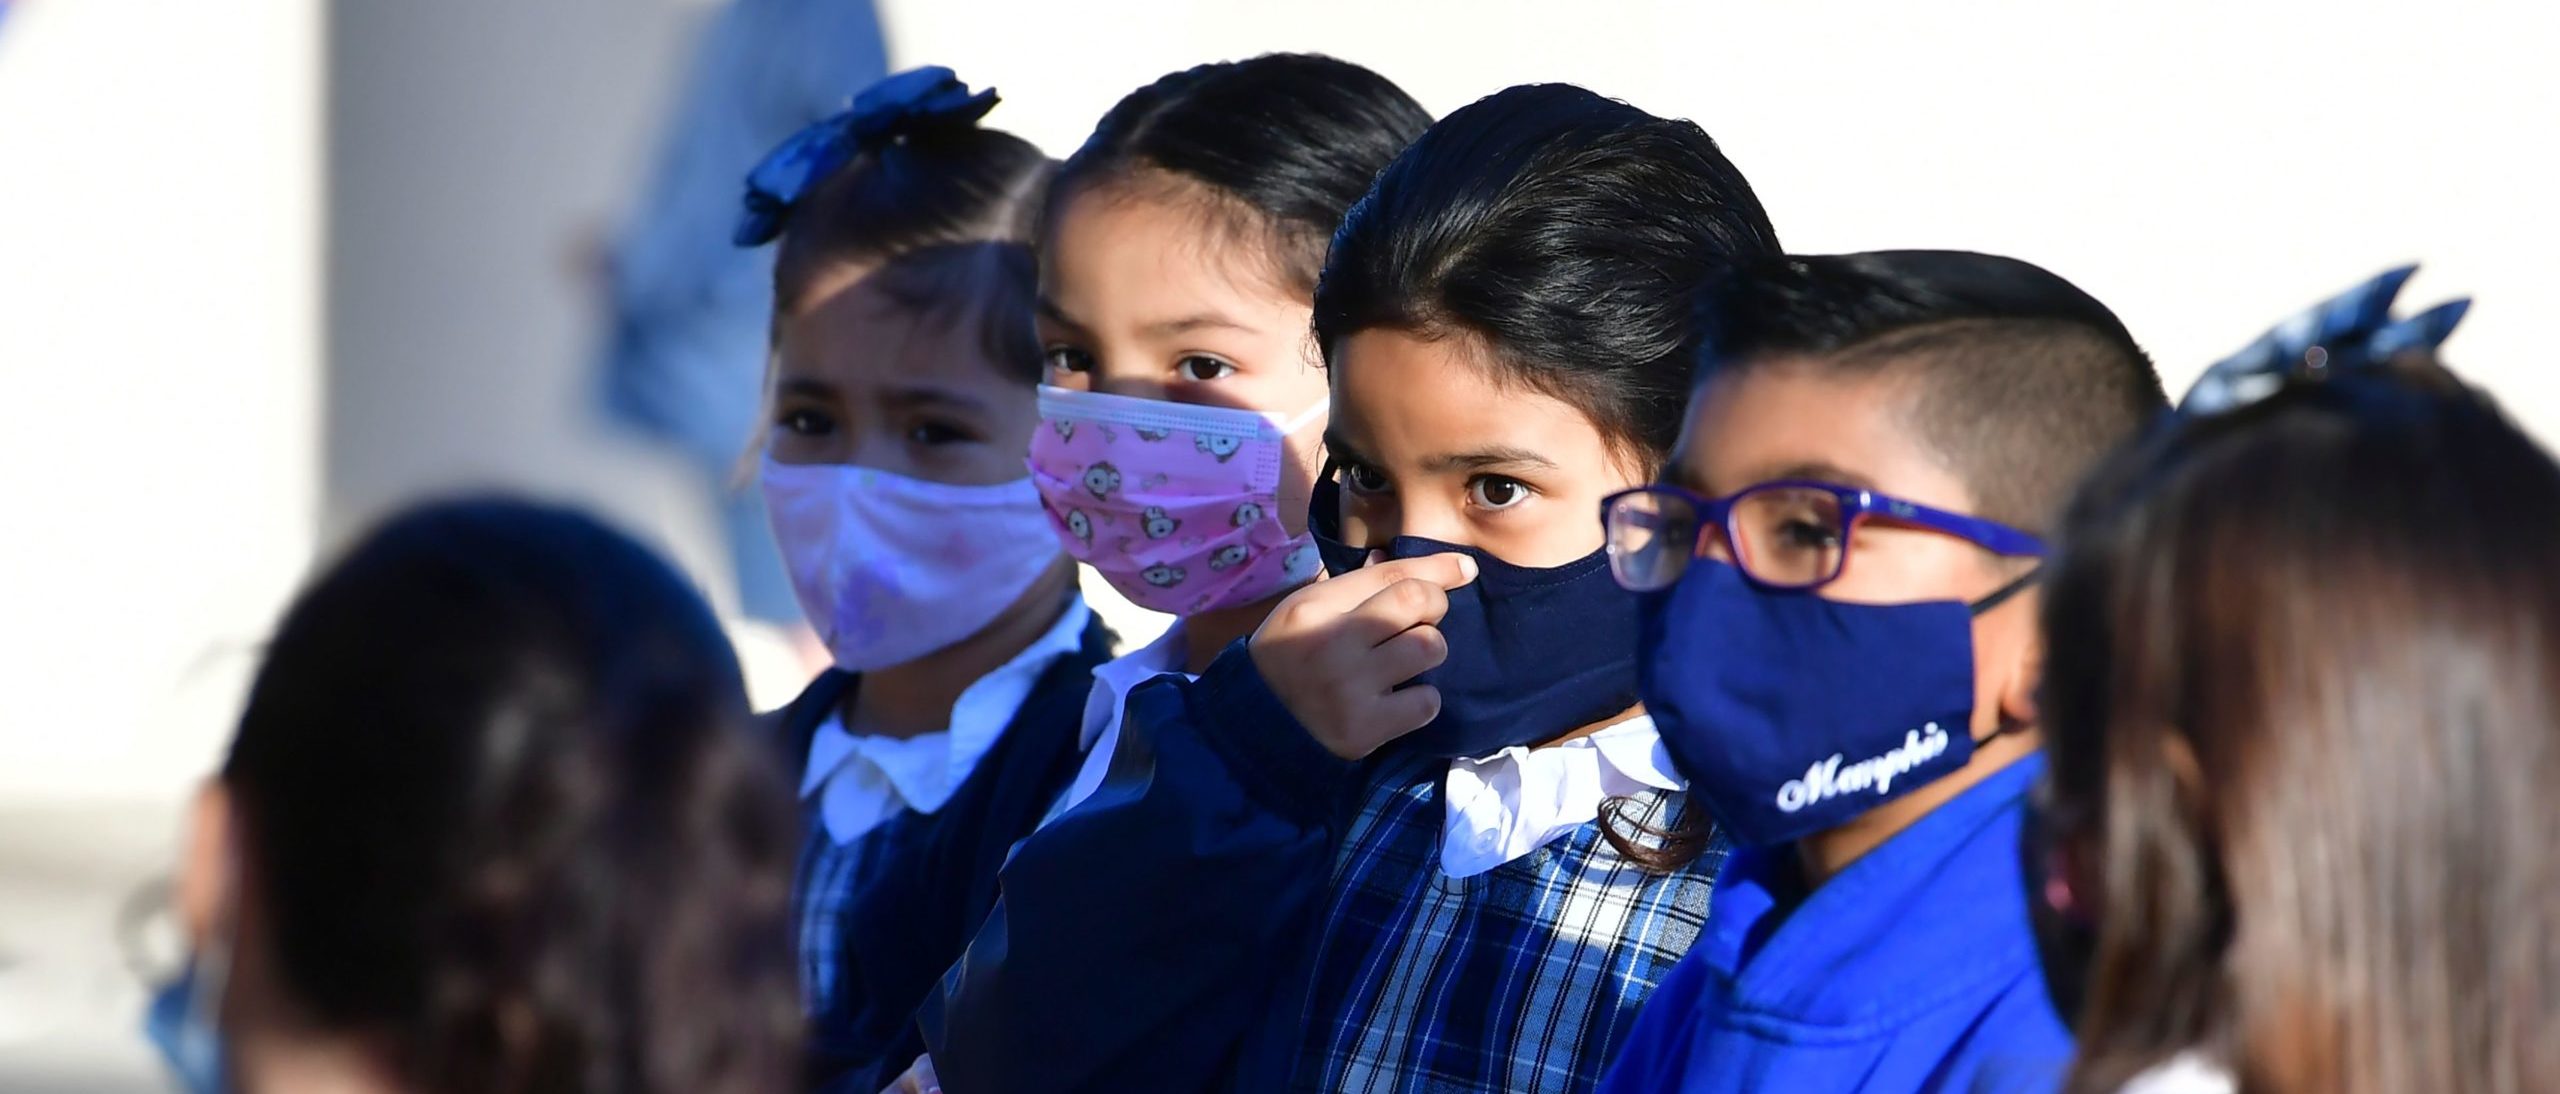 A students adjusts her facemask at St. Joseph Catholic School in La Puente, California on November 16, 2020, where pre-kindergarten to Second Grade students in need of special services returned to the classroom today for in-person instruction. - The campus is the second Catholic school in Los Angeles County to receive a waiver approval to reopen as the coronavirus pandemic rages on. The US surpassed 11 million coronavirus cases Sunday, adding one million new cases in less than a week, according to a tally by Johns Hopkins University. (Photo by Frederic J. BROWN / AFP) (Photo by FREDERIC J. BROWN/AFP via Getty Images)